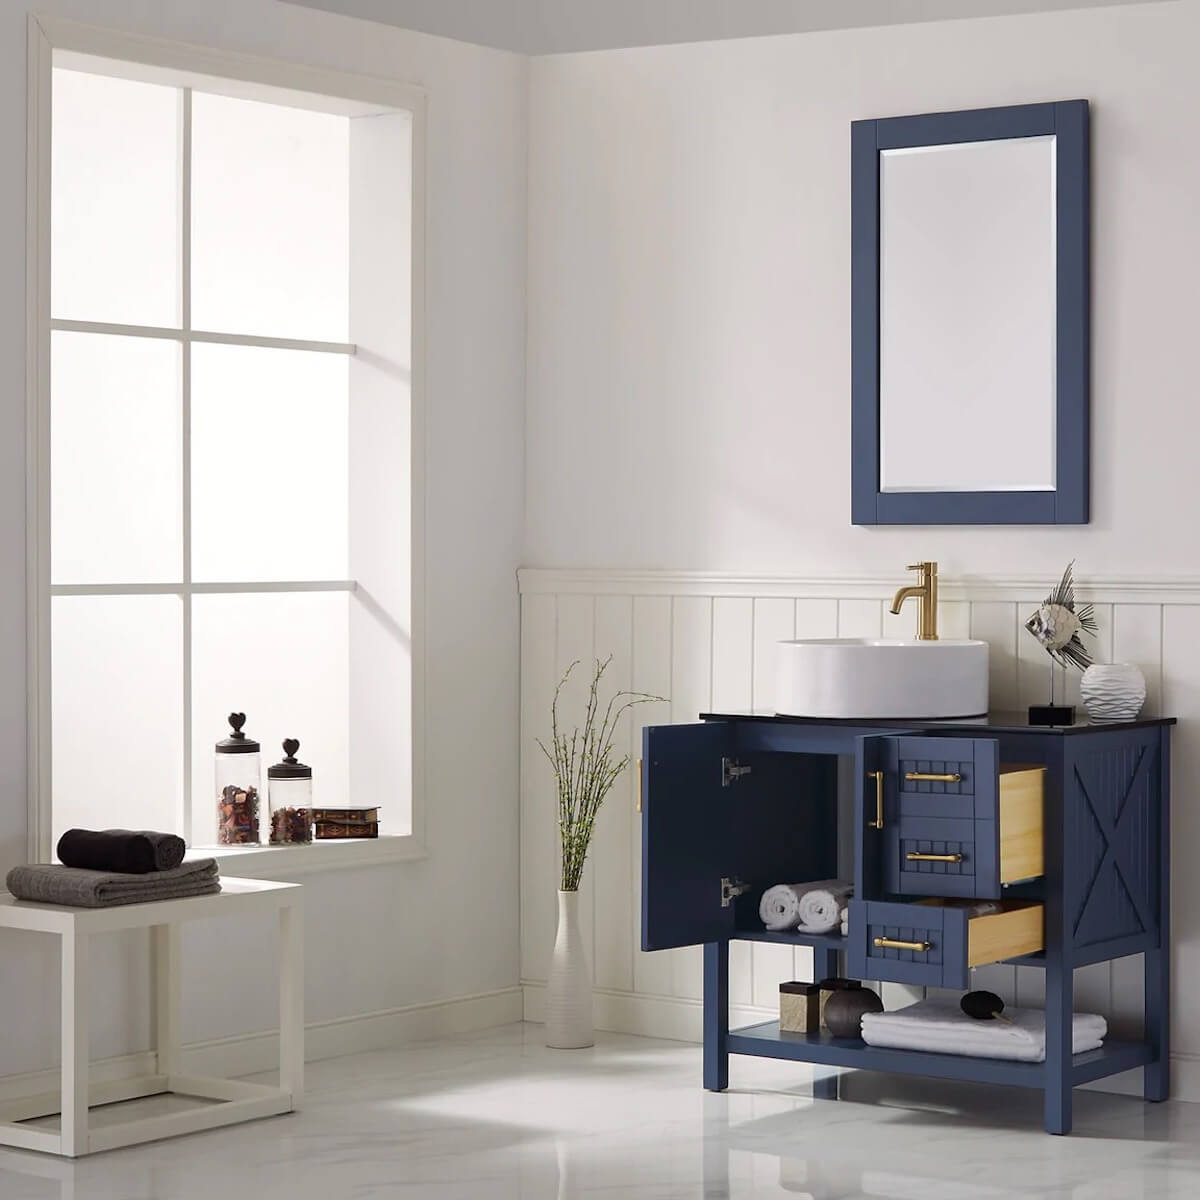 Vinnova Modena 36 Inch Royal Blue Freestanding Single Vanity with Glass Countertop and White Vessel Sink With Mirror Inside 756036-RB-BG